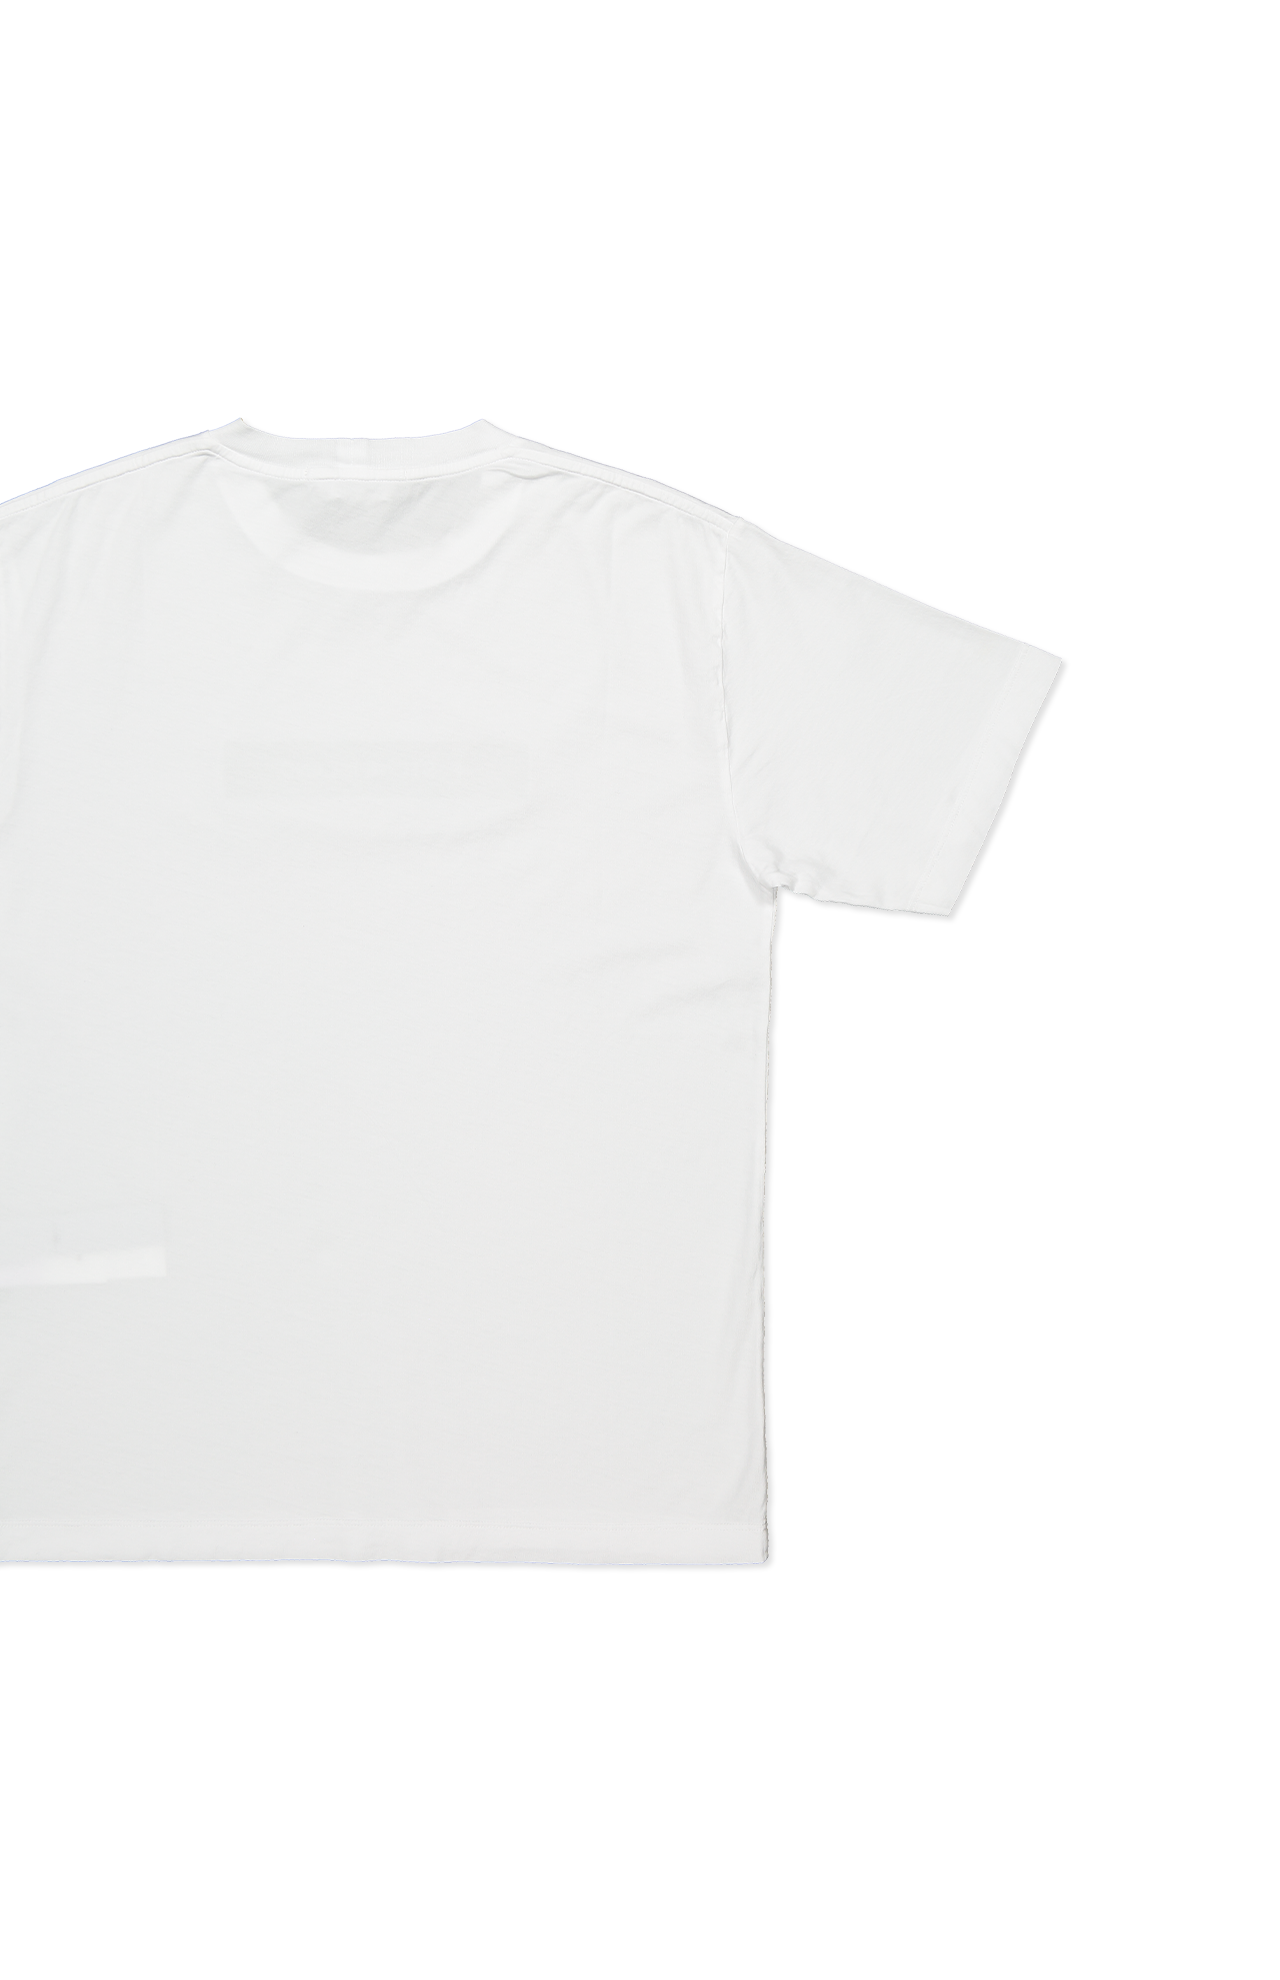 Stone Island Rectangle Front T-Shirt in White, Back Detail Image (7055698526323)